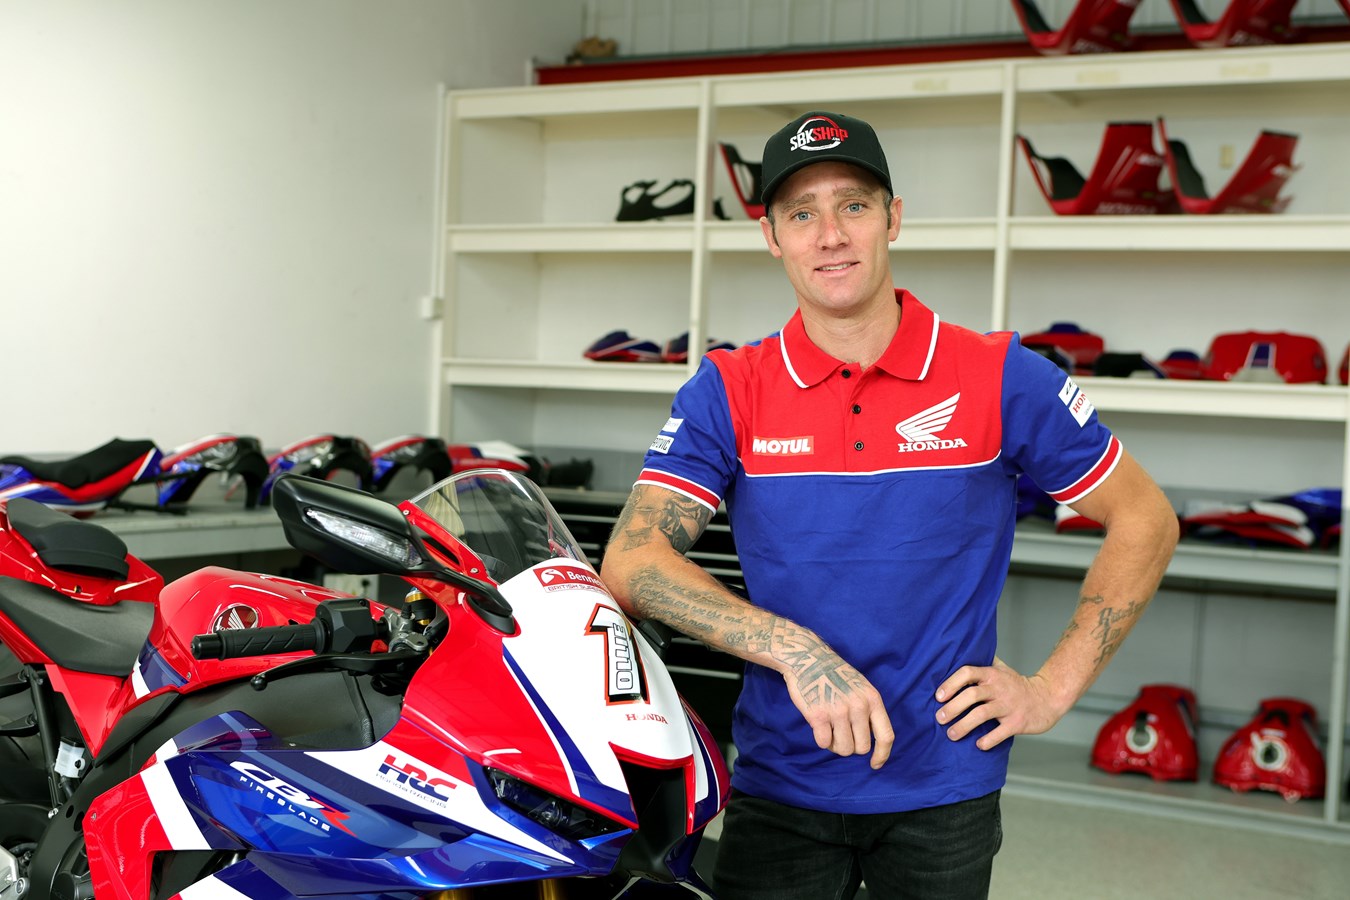 Reigning champion Tommy Bridewell joins Honda with title-defending ambition